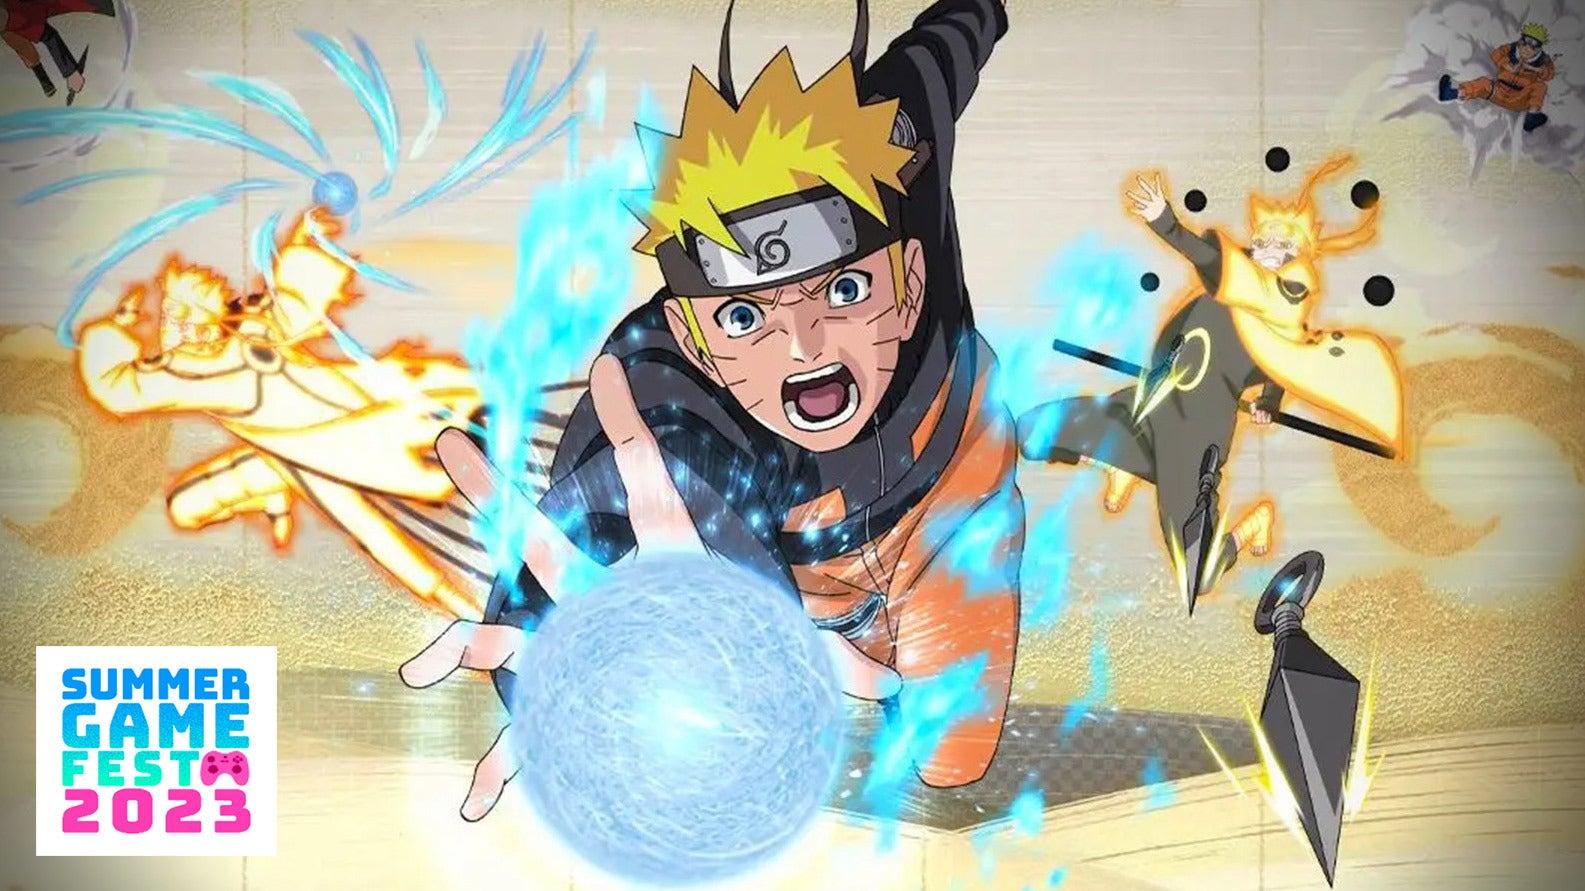 I M Not Even A Naruto Fan But The New Fighting Game Is Turning Me